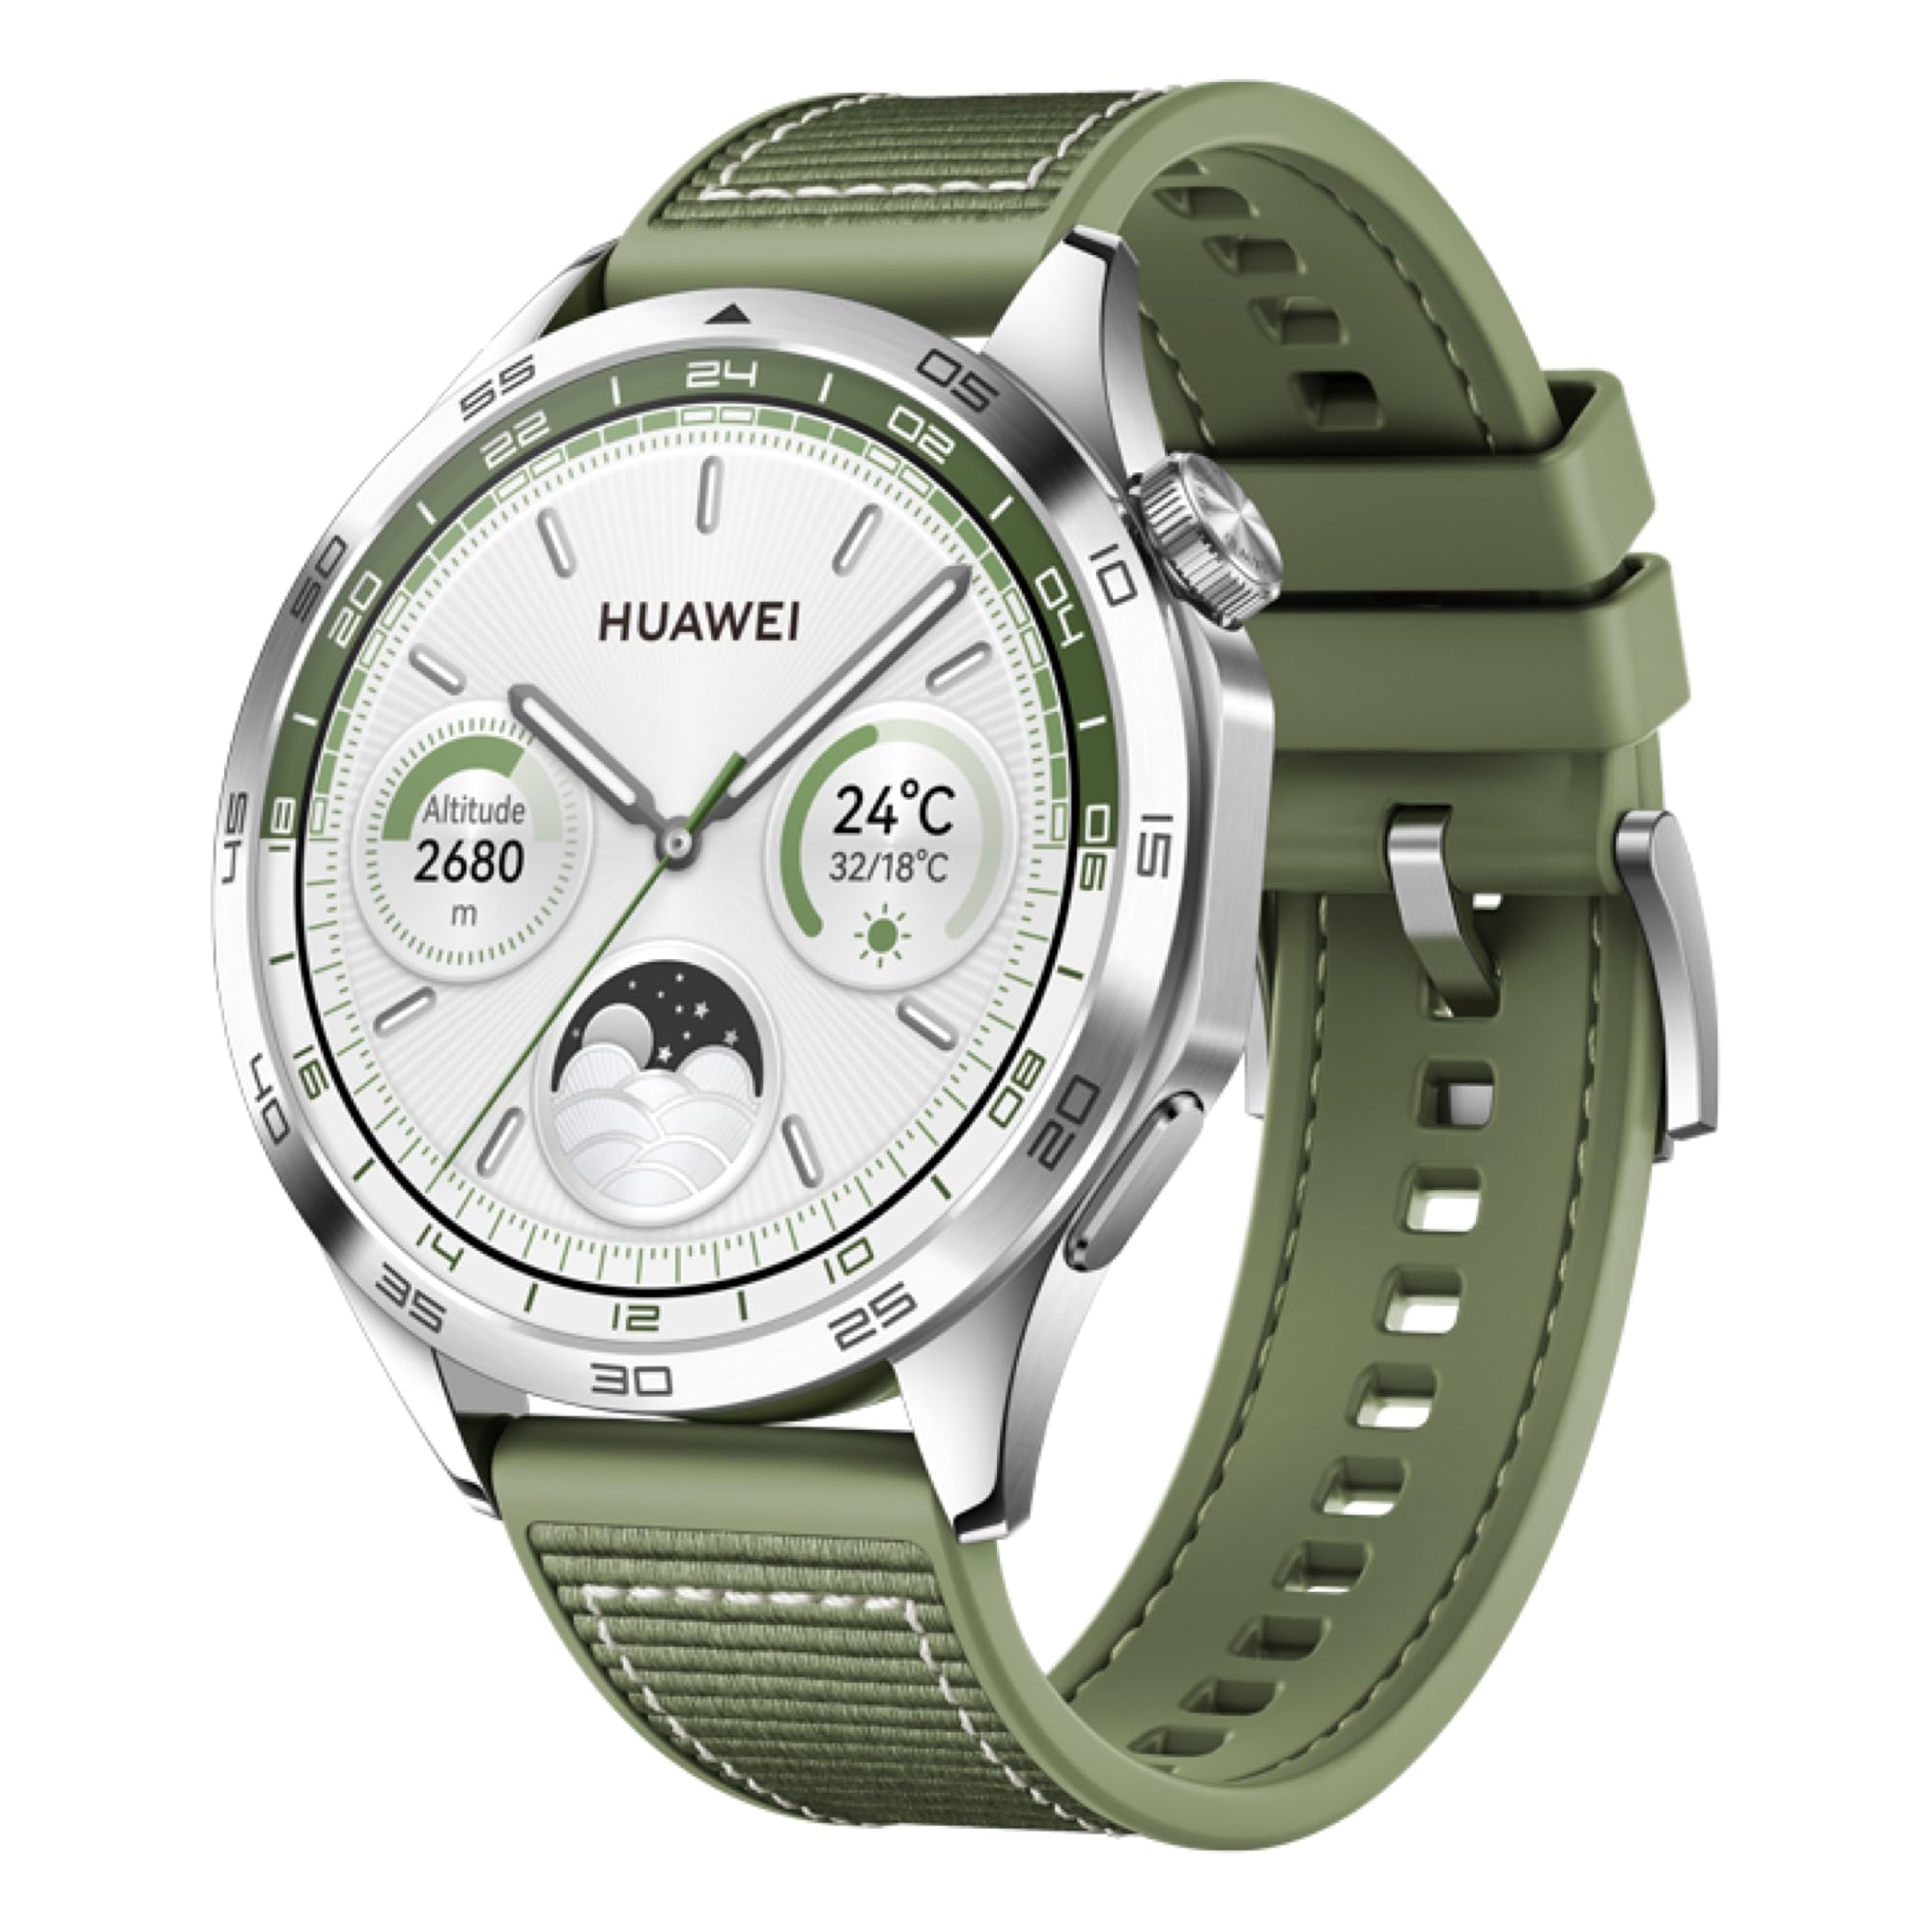 HUAWEI Watch GT4 46mm Smartwatch, Upto 2-Weeks Battery Life, Dual-Band Five-System GNSS Positioning, Pulse Wave Arrhythmia Analysis, 24/7 Health Monitoring, Compatible with Android & iOS, Green